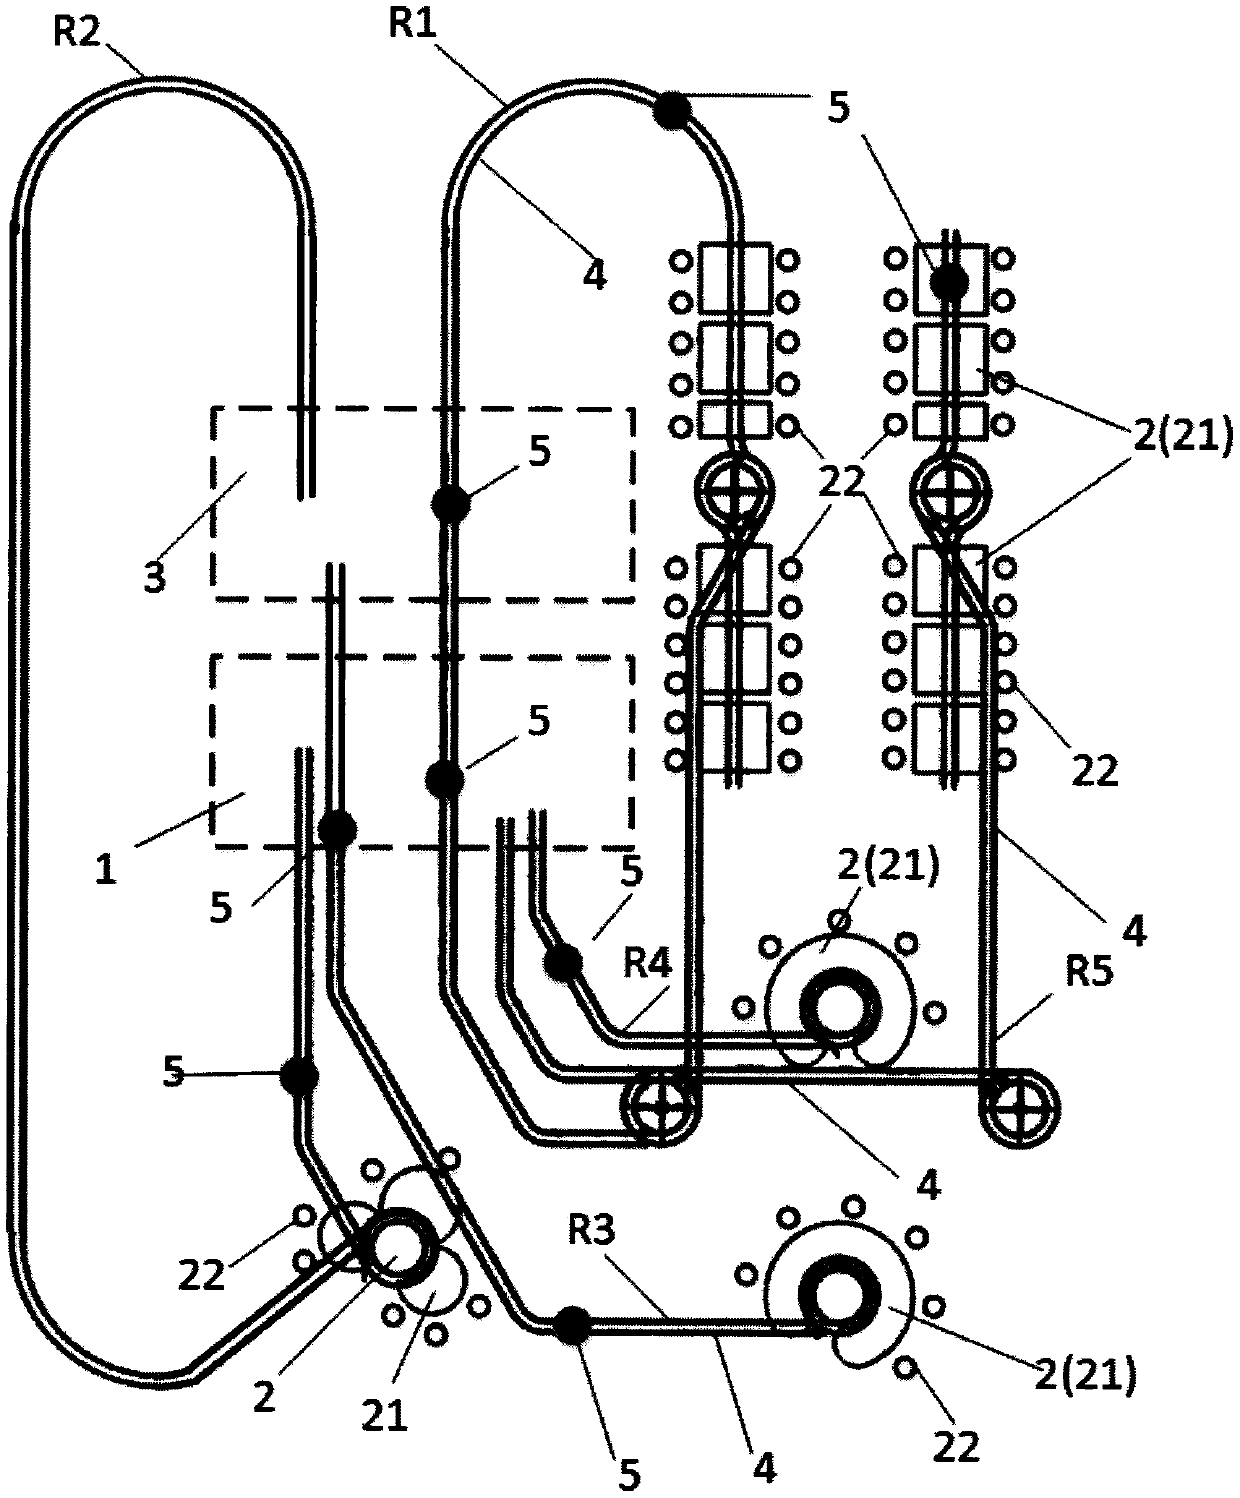 Restaurant stereoscopic rail power transmission system and article transport method